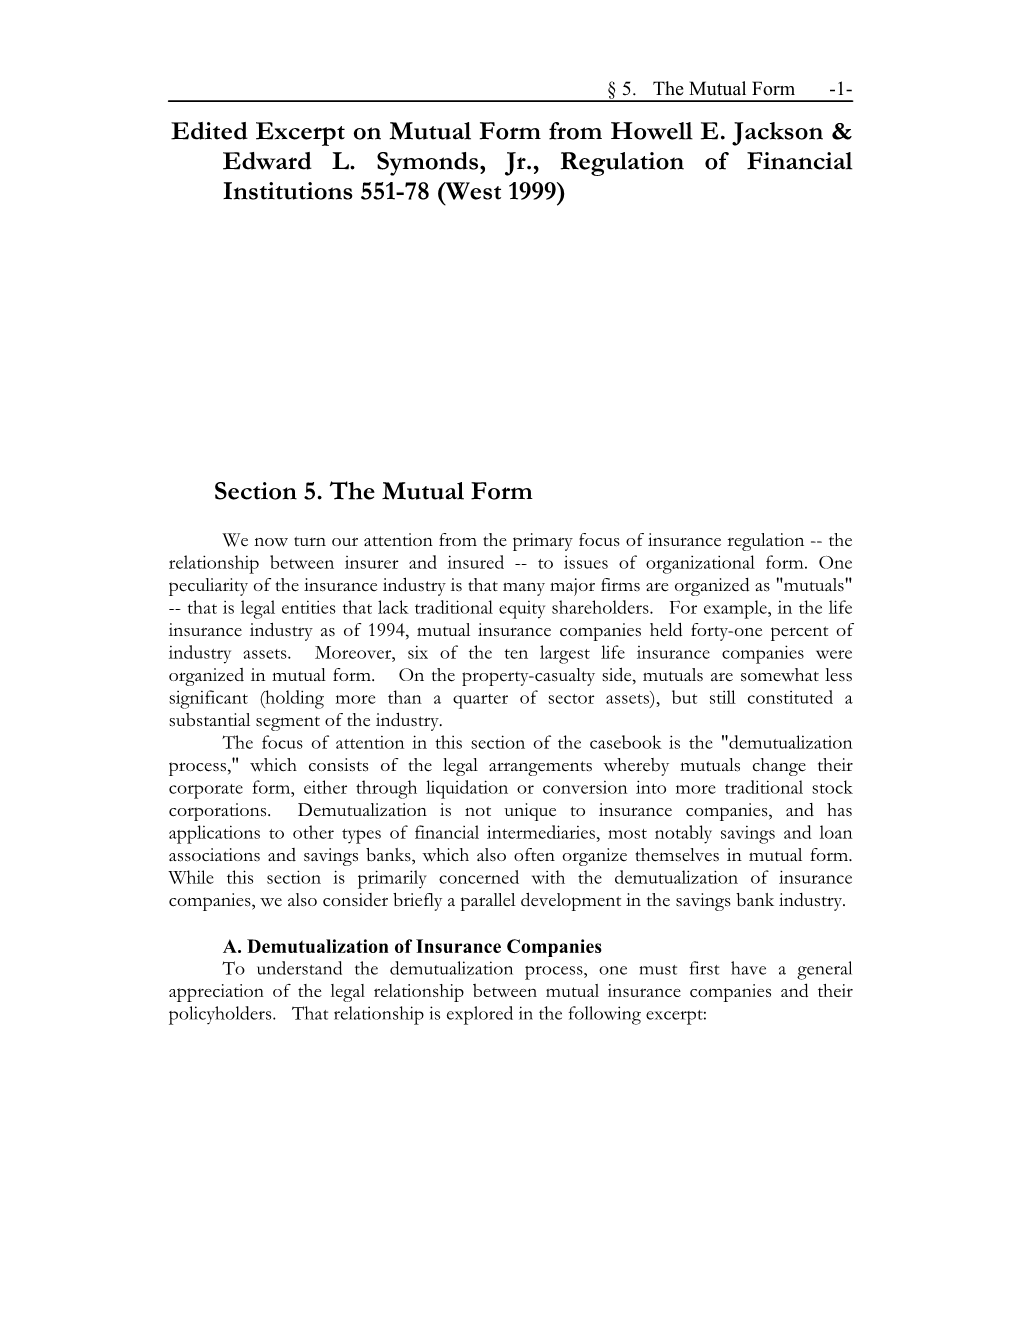 Edited Excerpt on Mutual Form from Howell E. Jackson & Edward L